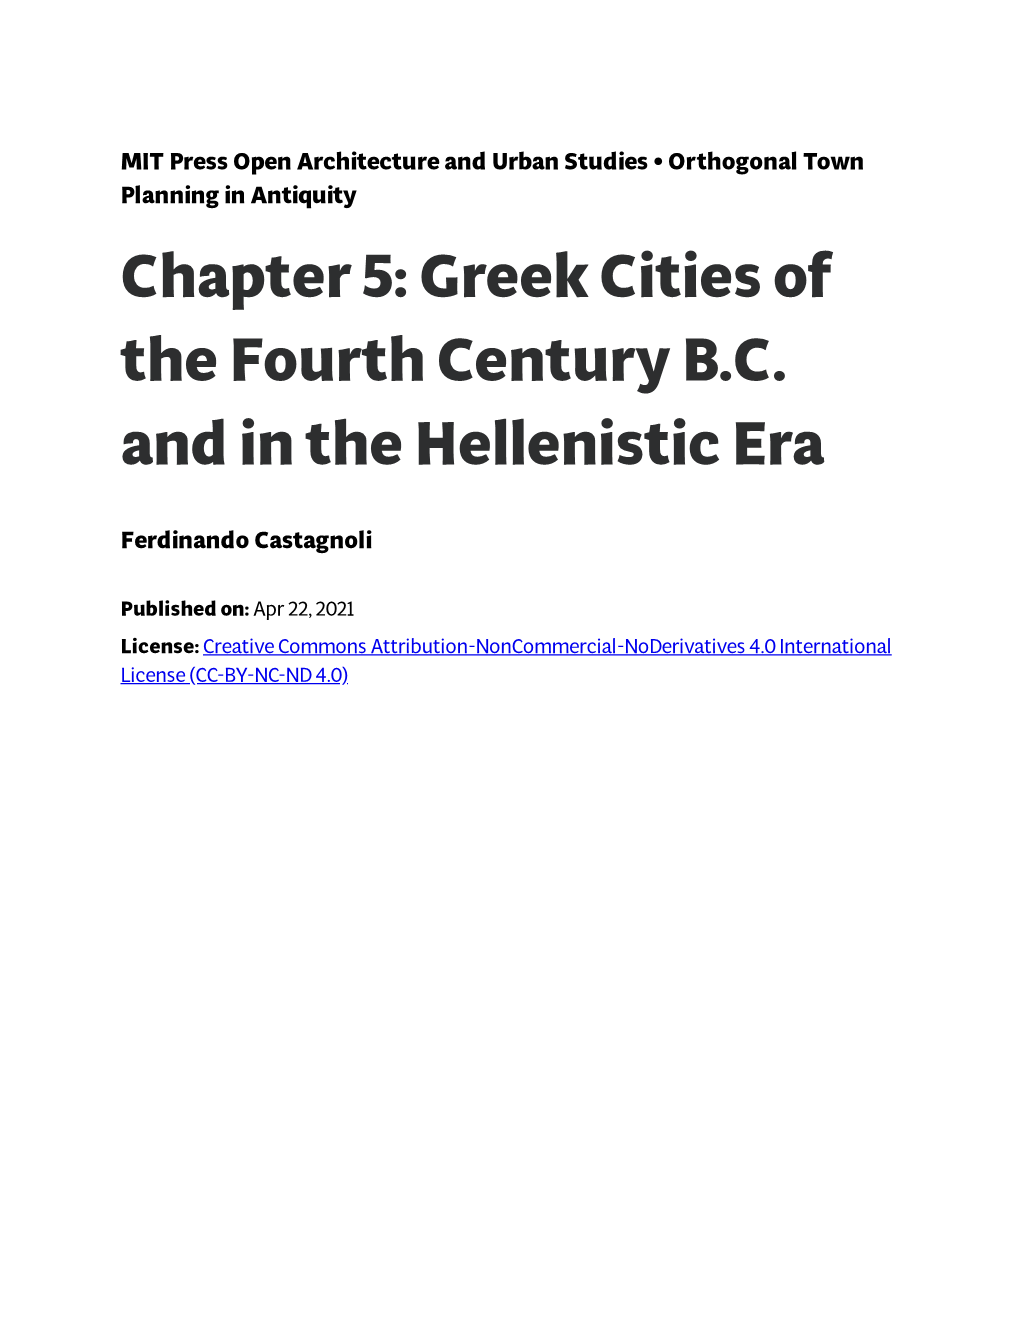 Greek Cities of the Fourth Century BC and in the Hellenistic